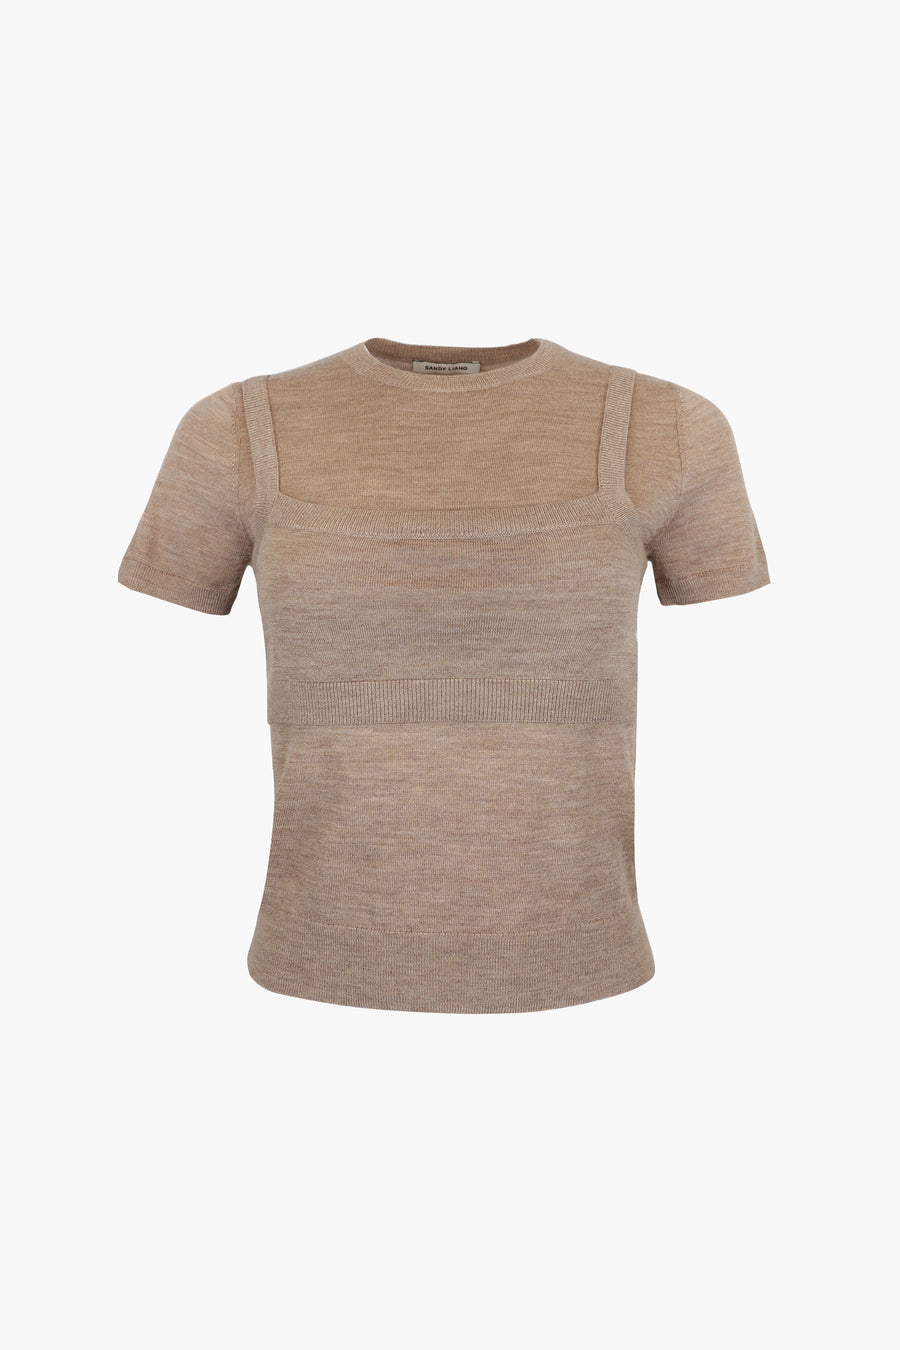 Short sleeve sweater in peanut with built in layered bra